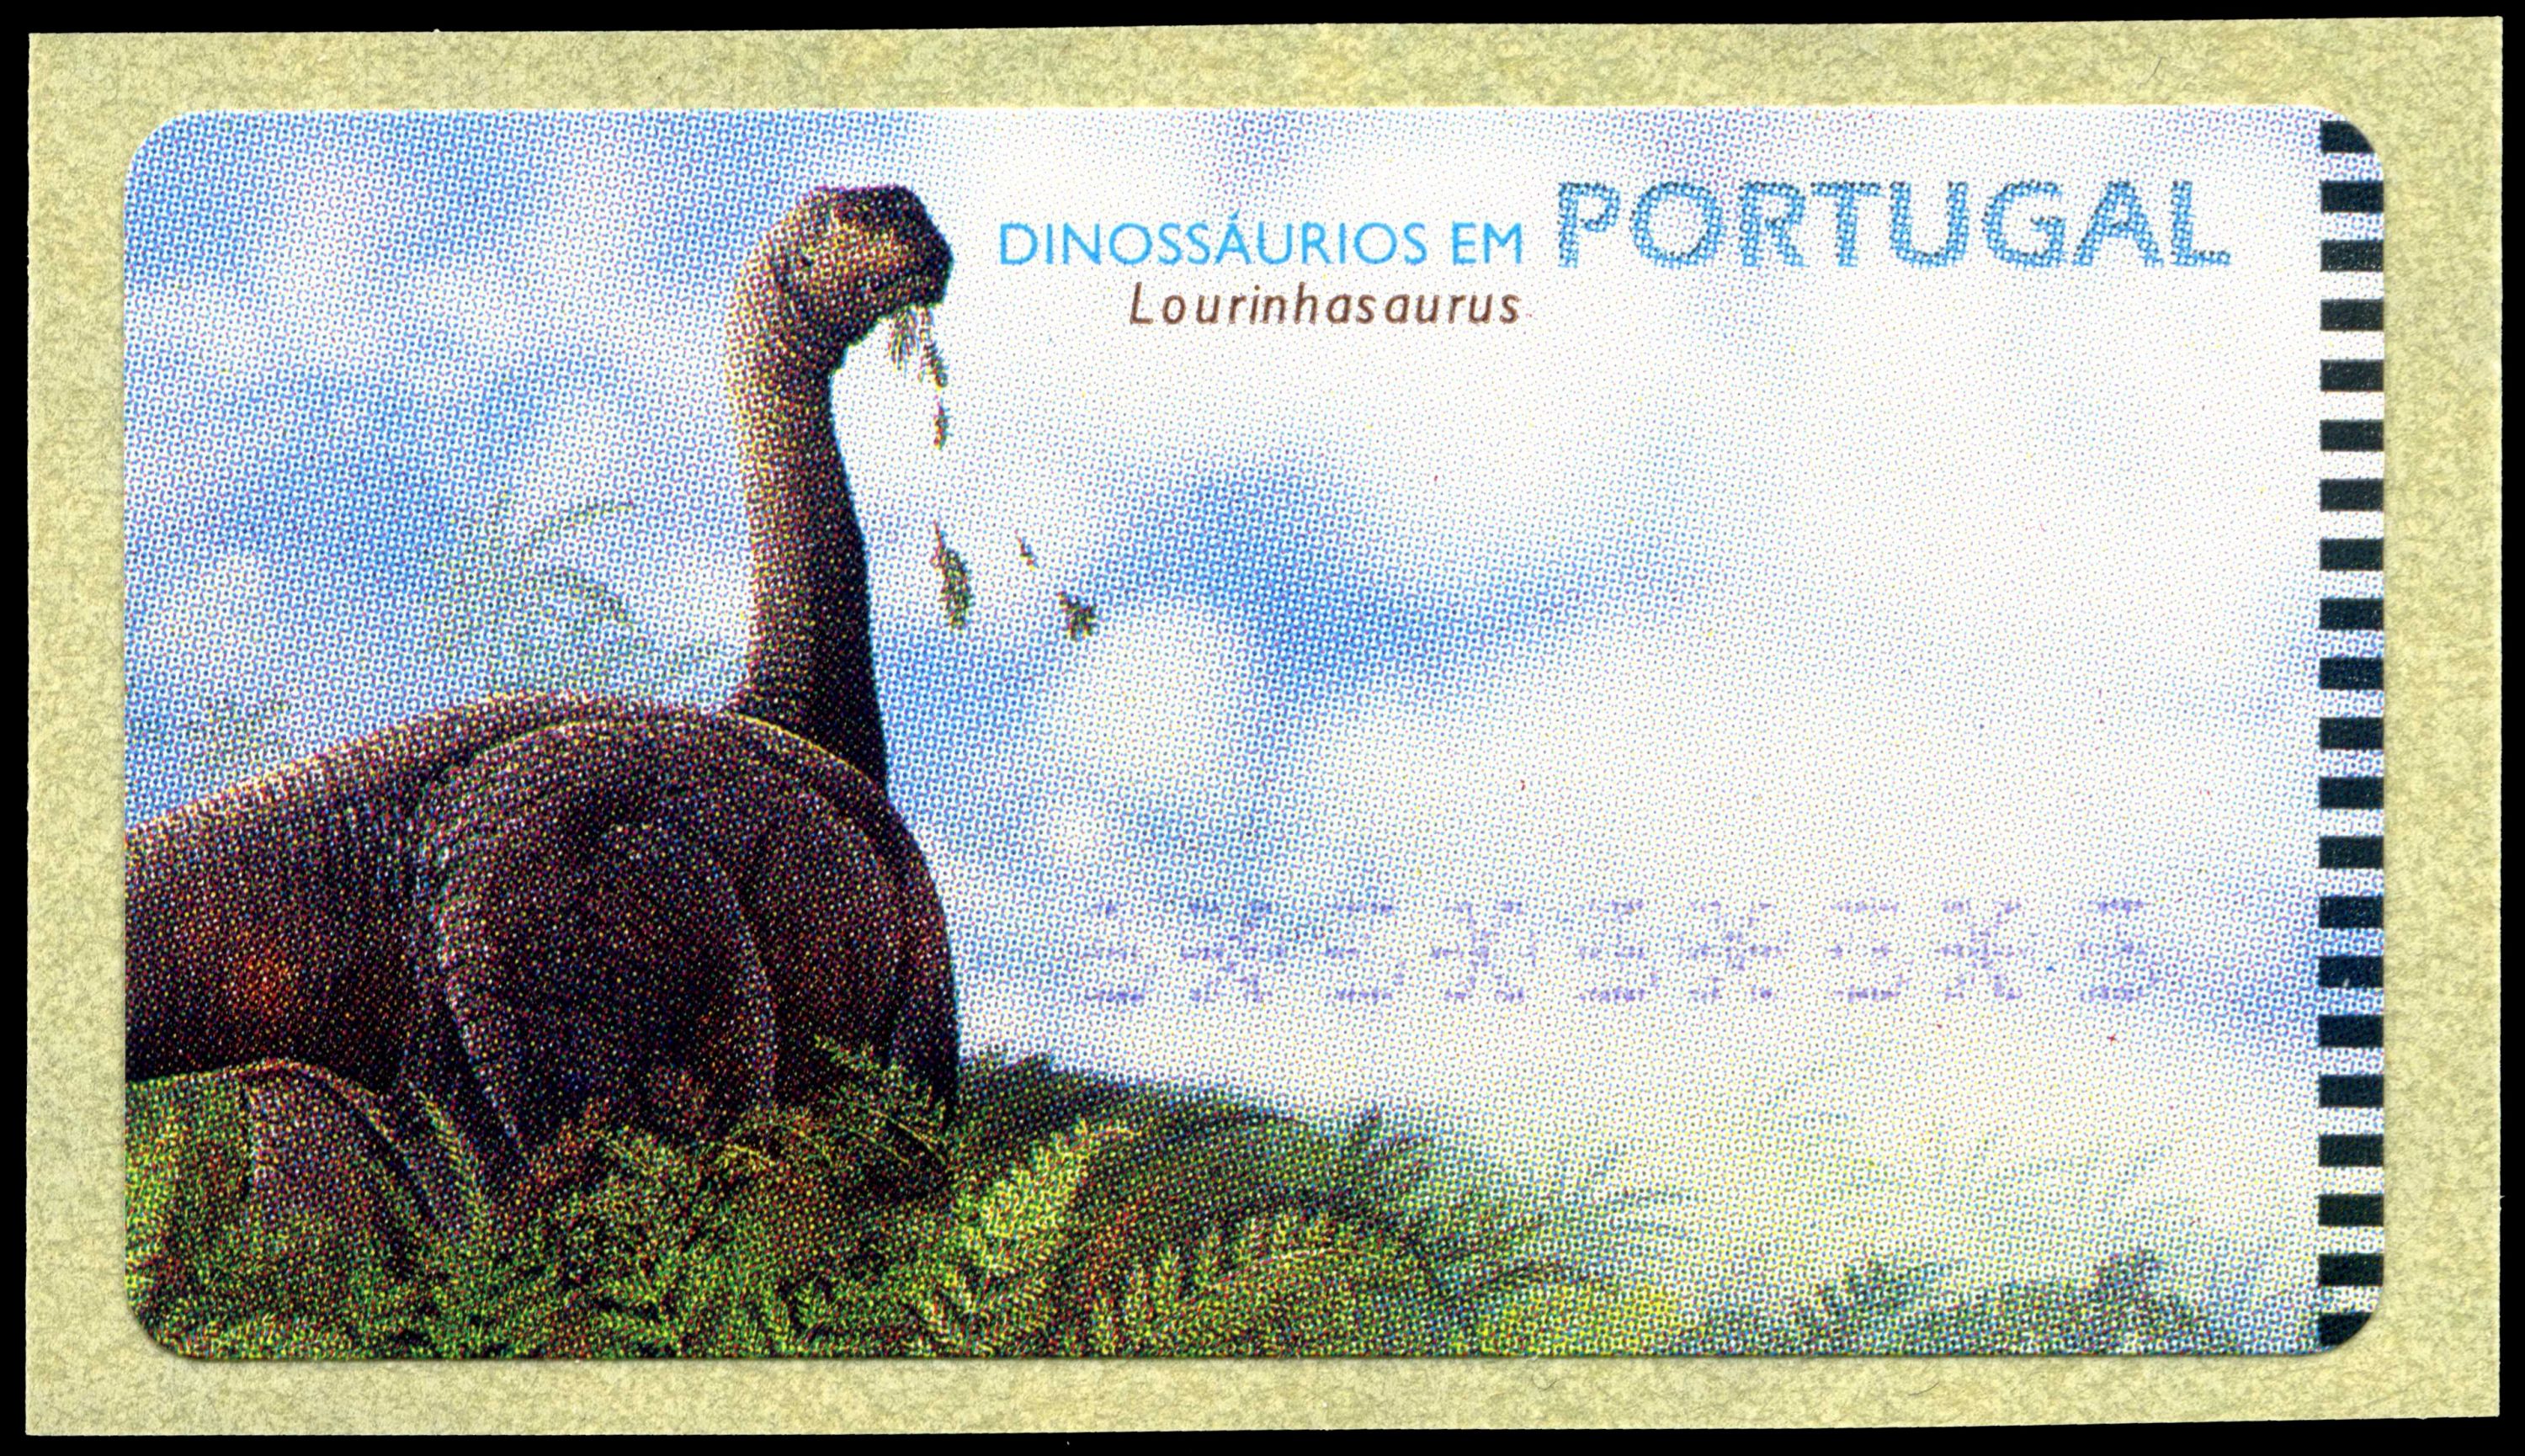 Sauropod on stamp of Portugal